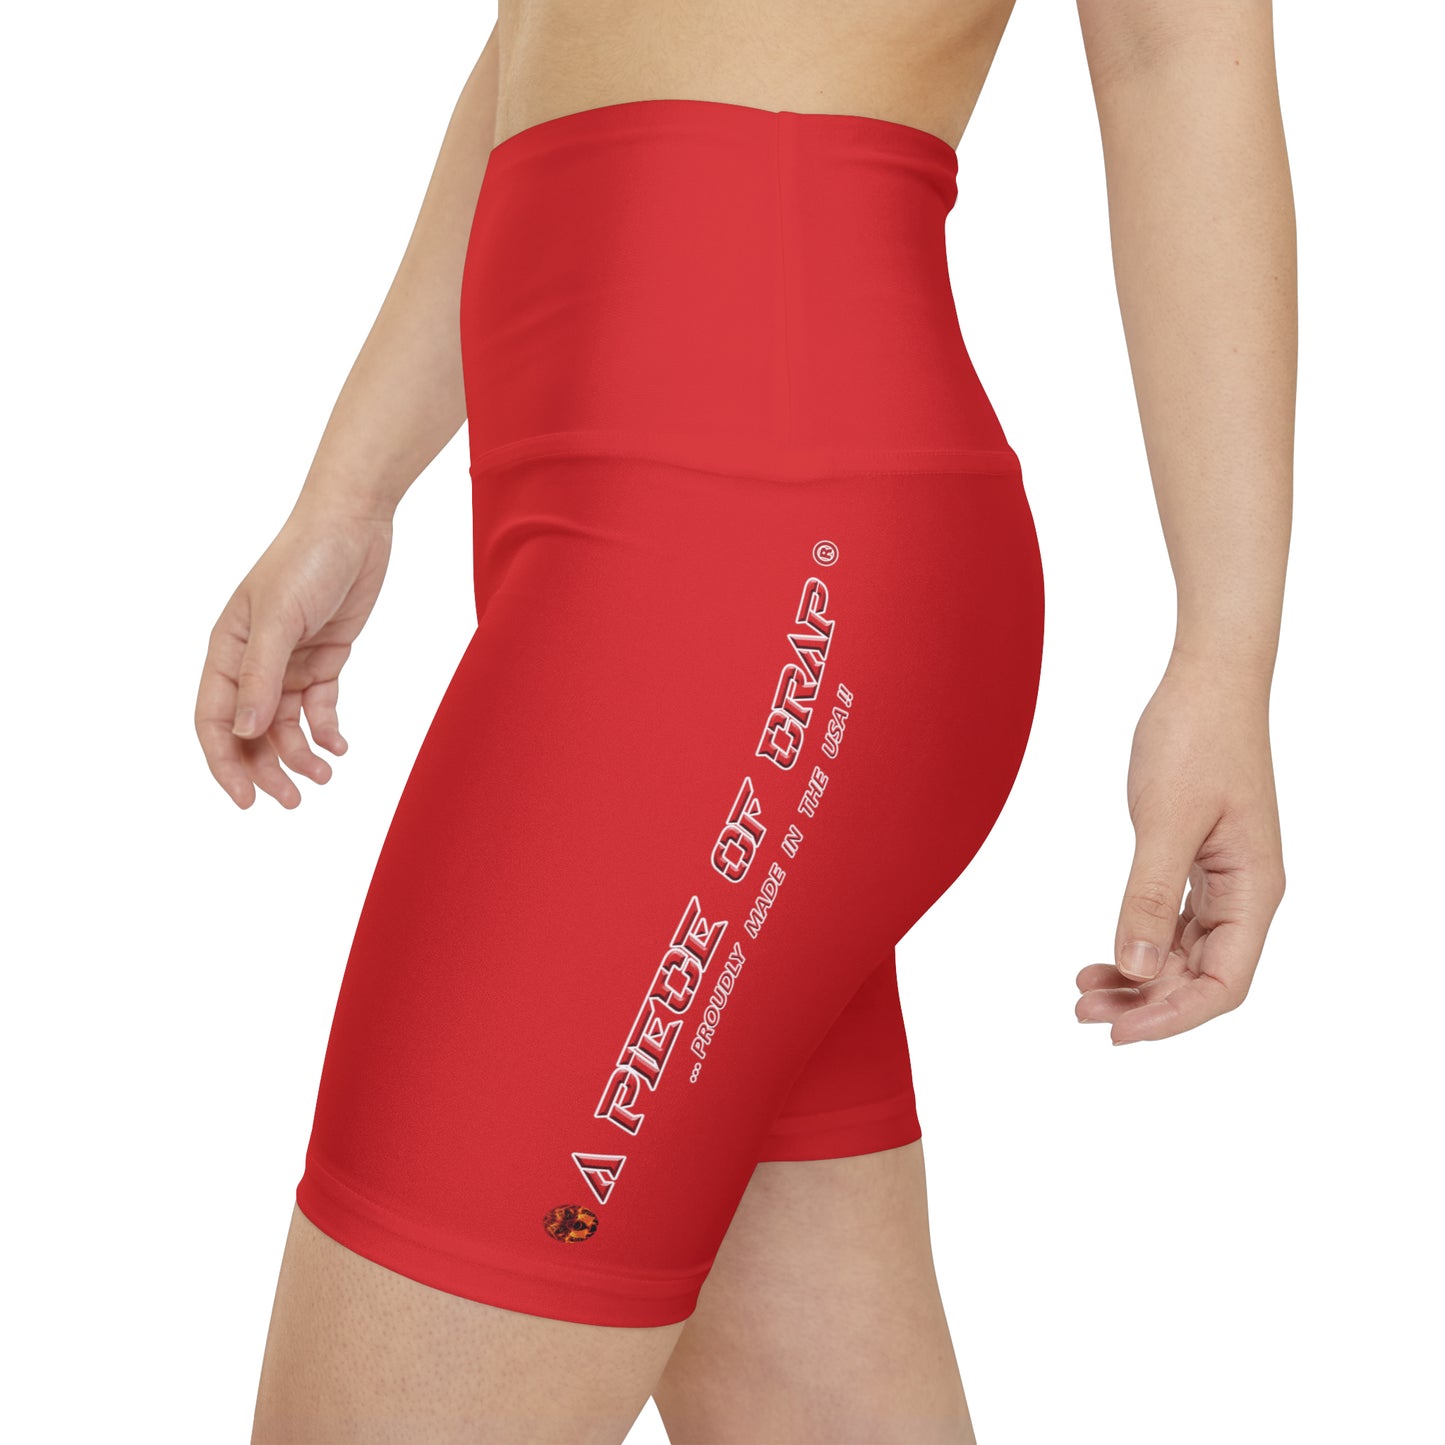 A Piece Of Crap WorkoutWit Shorts - Red